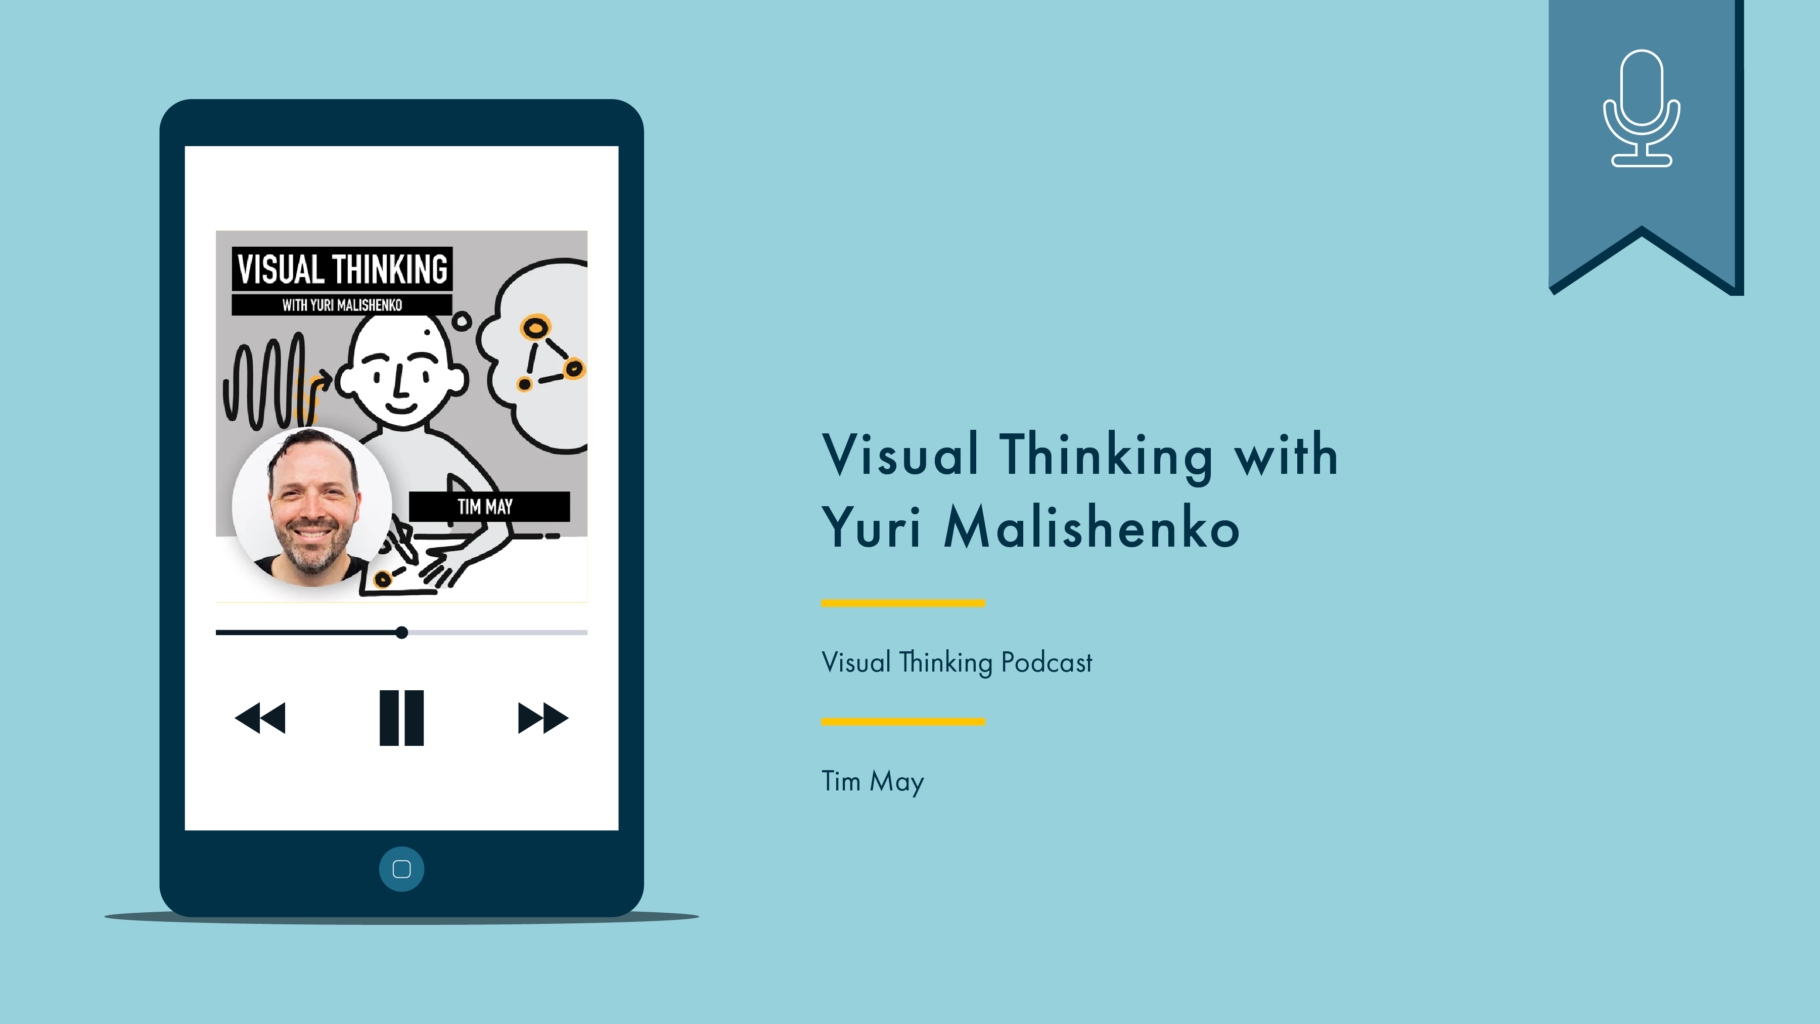 Phone with podcast artwork on the left. On the right reads “Visual Thinking with Yuri Malishenko, Visual Thinking Podcast, Tim May.” Above is a blue flag with a white icon denoting that this is a podcast.